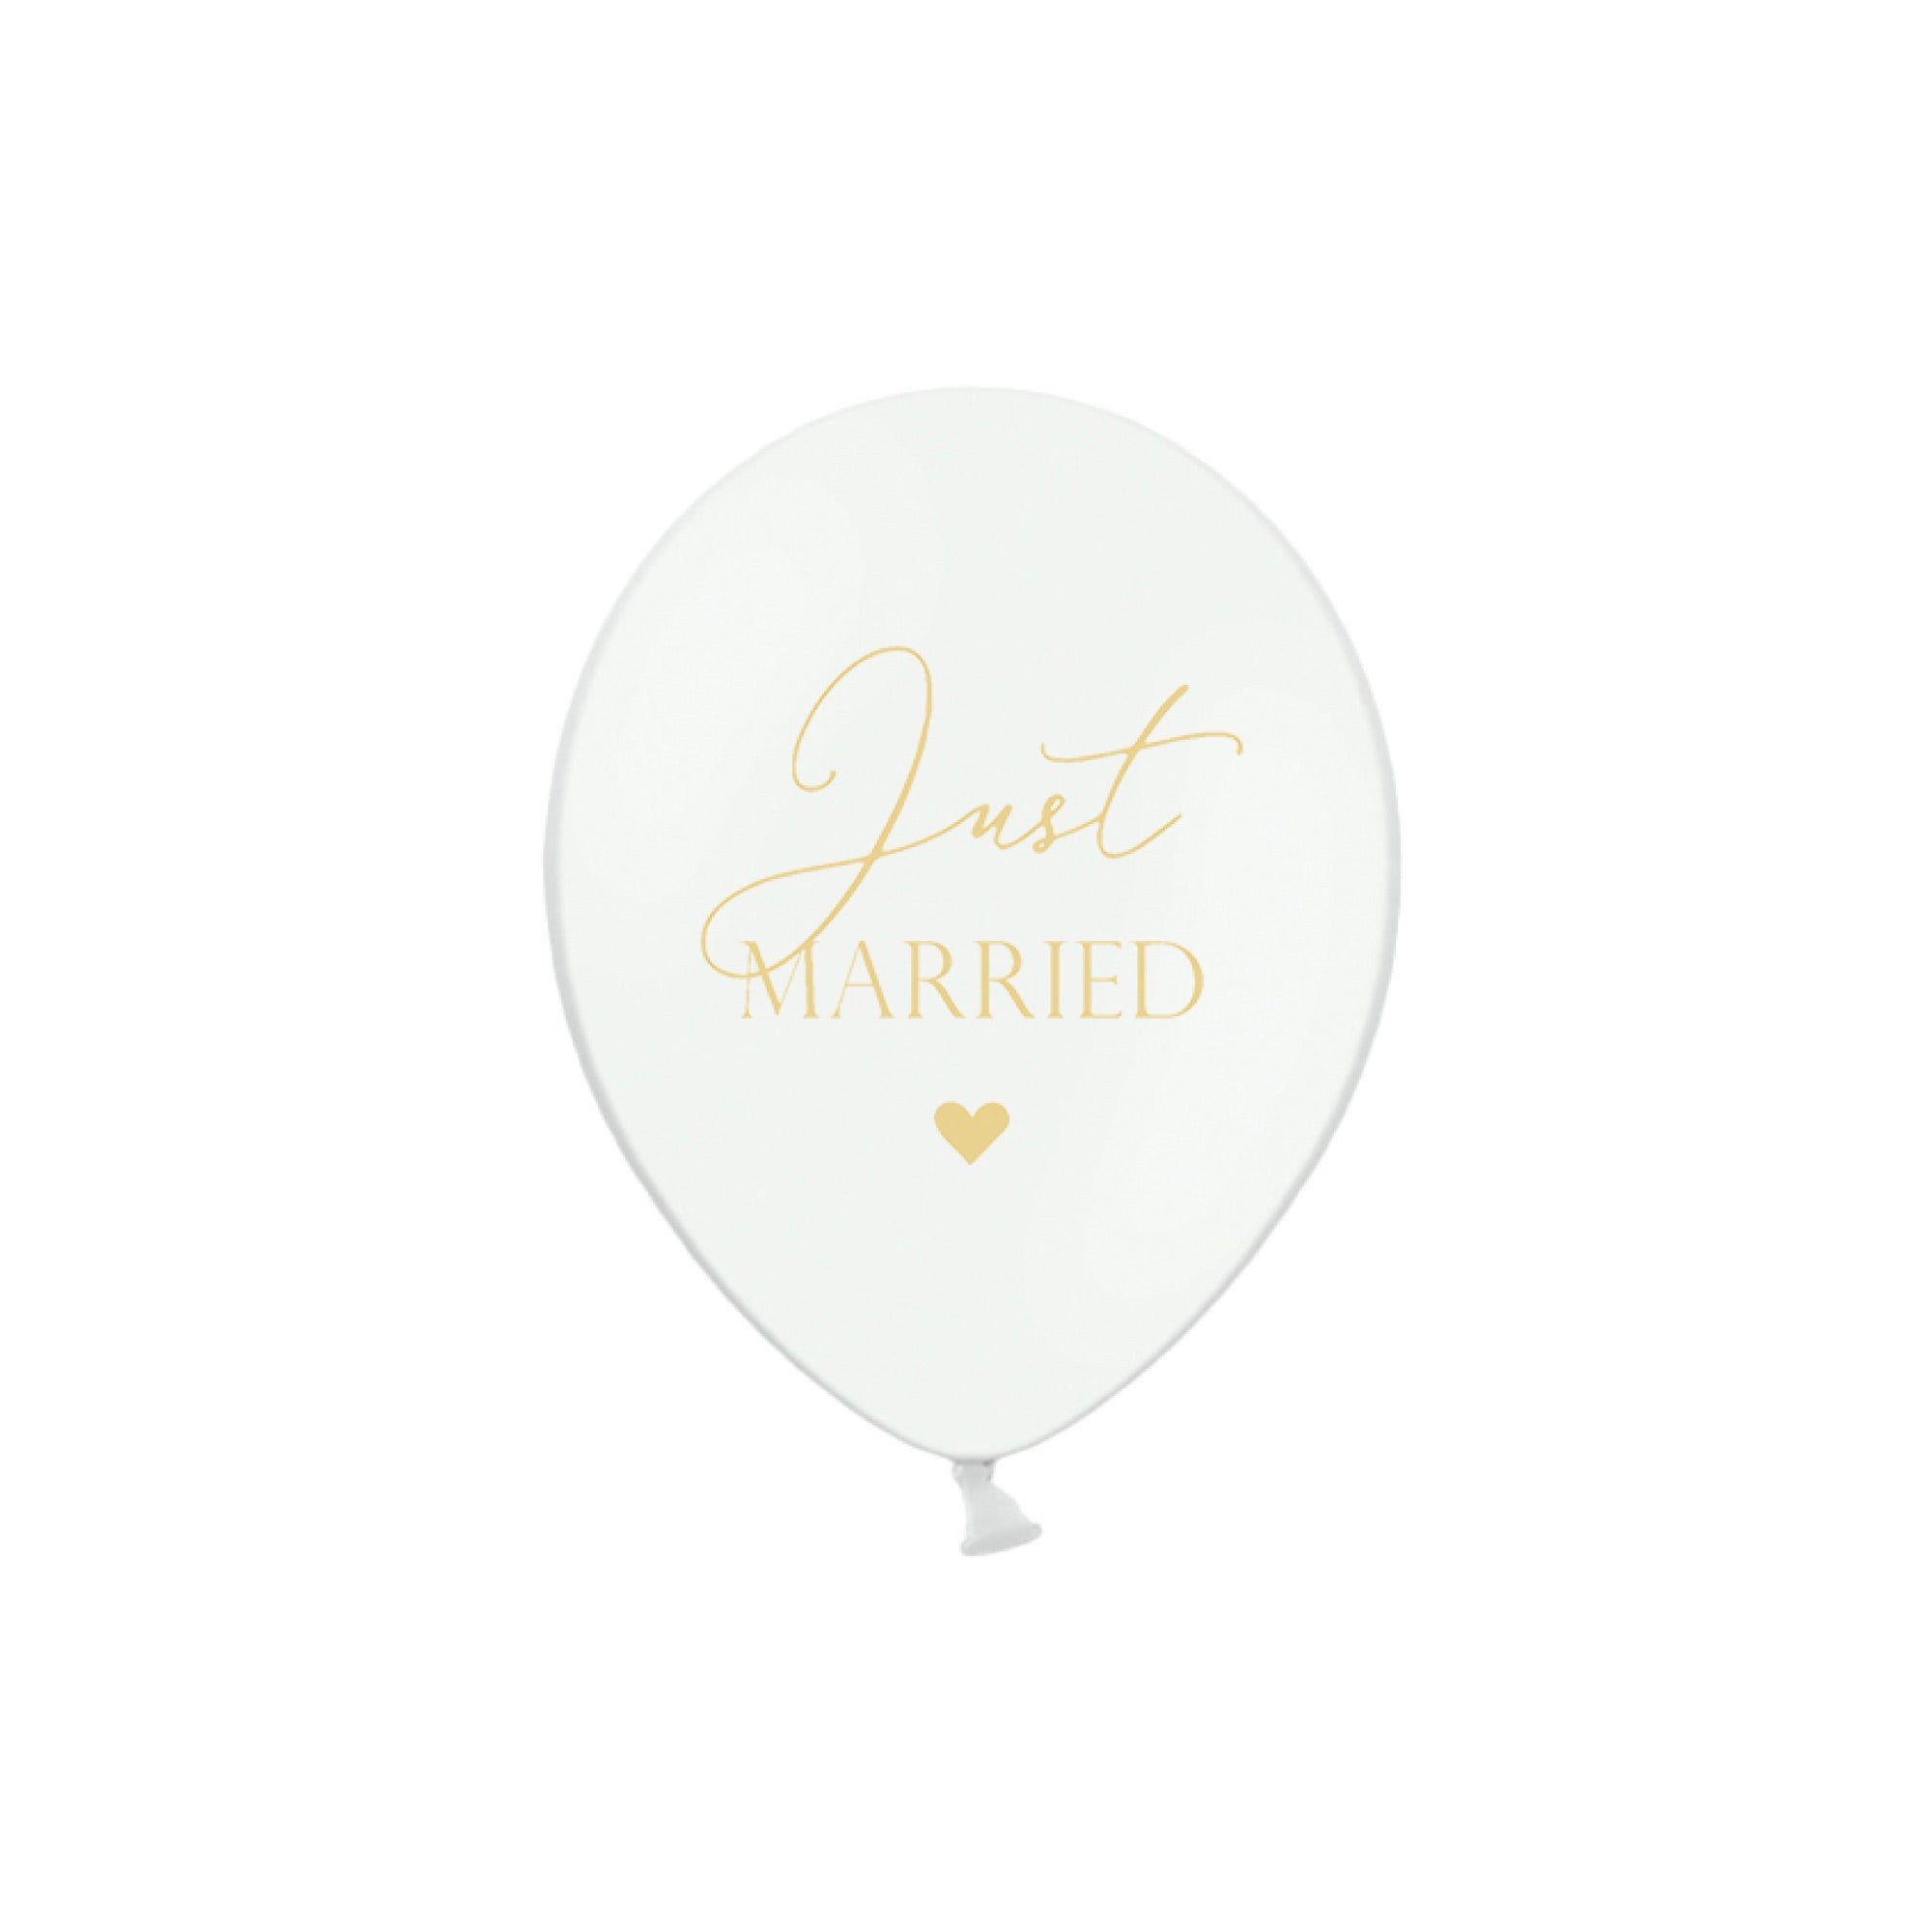 Just Married Wedding Balloons 6ct | The Party Darling